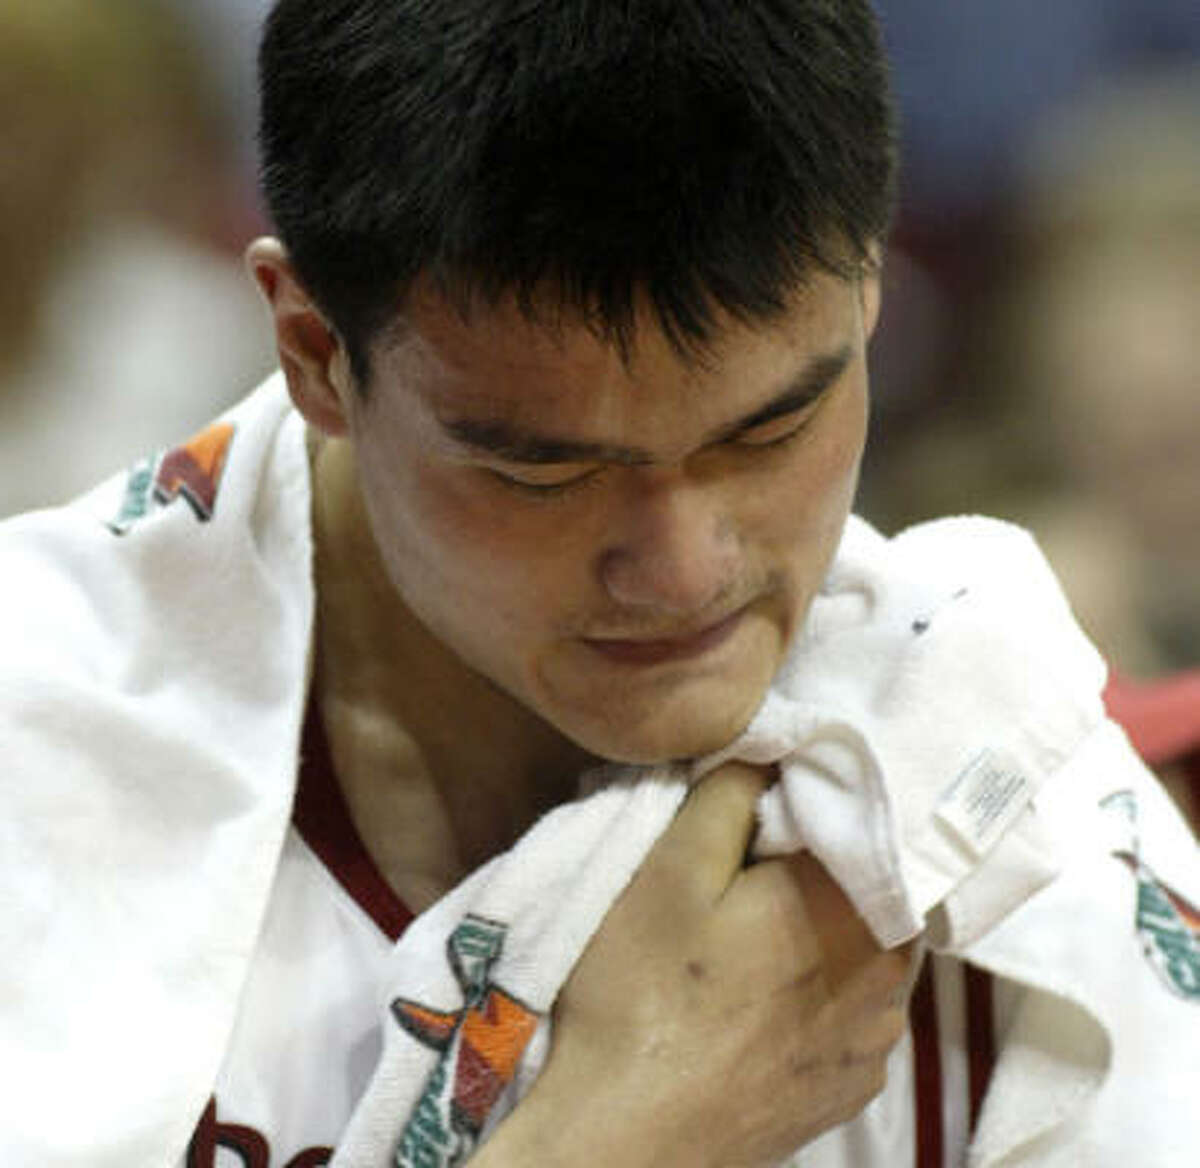 Reebok is redesigning the Yao Ming's ATP Pump shoes in an effort to stop his toe pain.